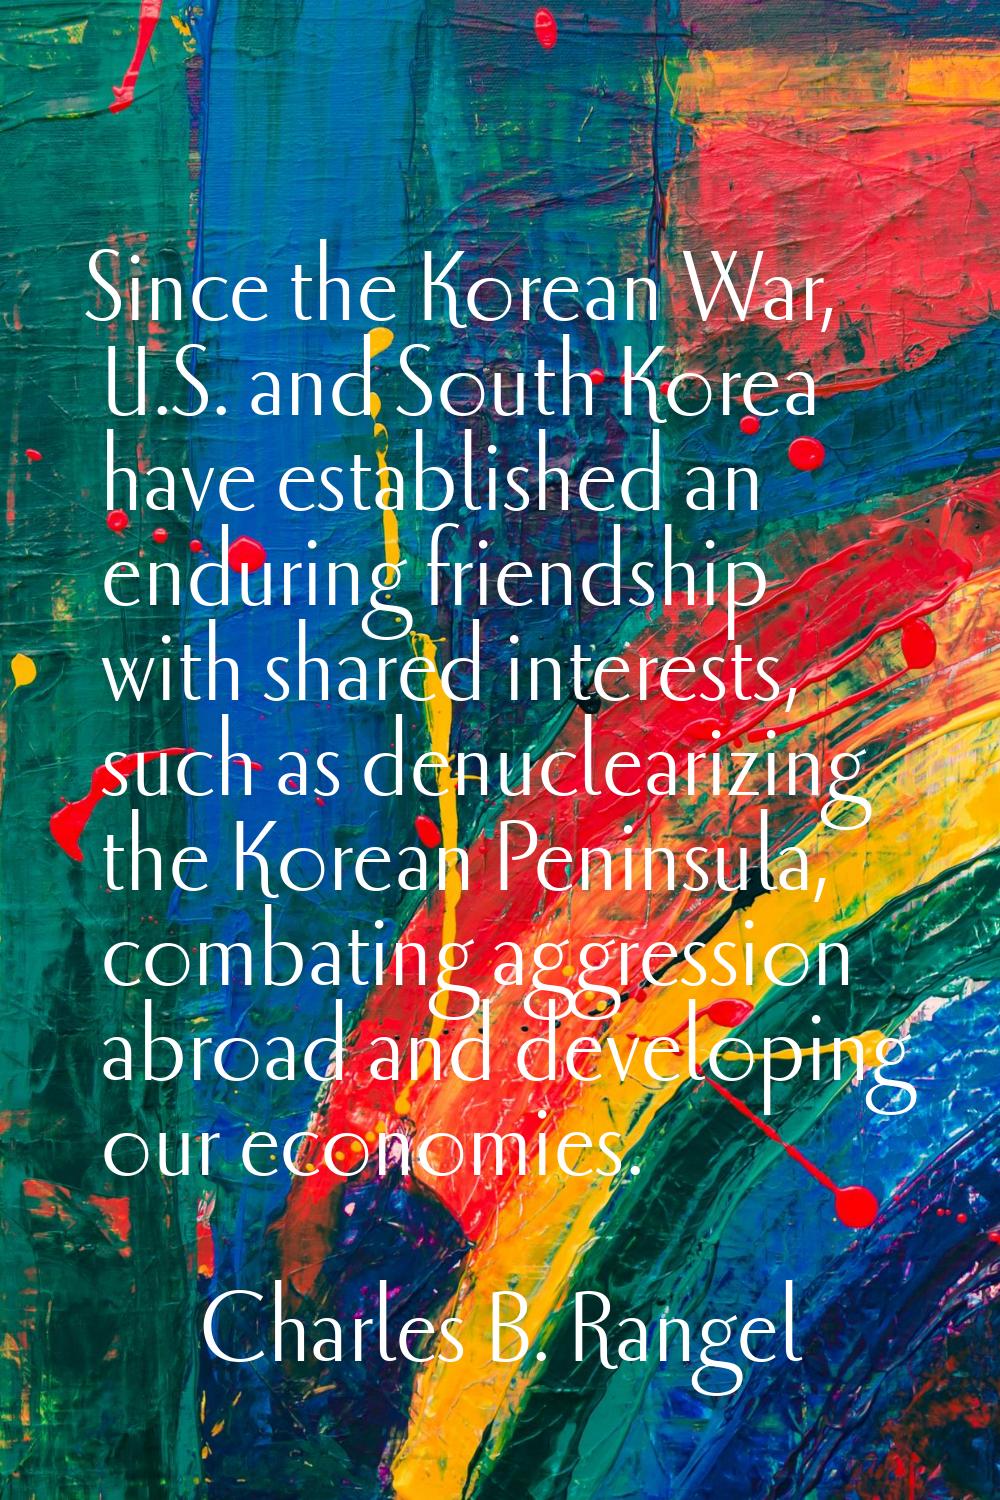 Since the Korean War, U.S. and South Korea have established an enduring friendship with shared inte